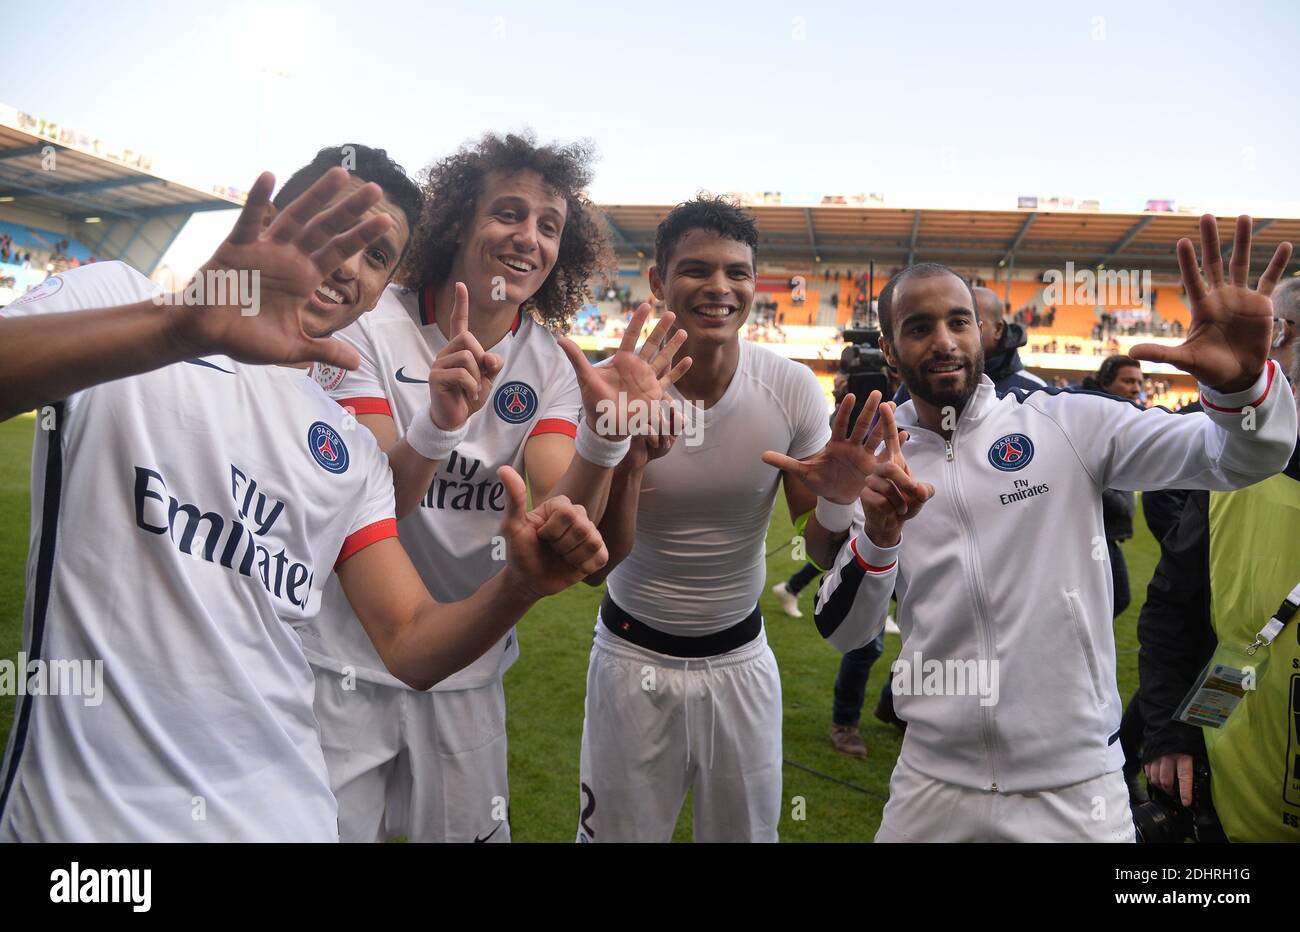 PSG's Marquinhos, David Luiz, Thiago Silva and Lucas Moura celebrate during the French First League Football match,Troyes vs. Paris Saint-Germain at the Aube Stadium in Troyes, France on on March 13, 2016. PSG won 9-0. Paris Saint-Germain clinched a fourth consecutive Ligue 1 title in record time on March 13 after defeating Troyes, obliterating a new French record for the quickest league victory with eight games to spare before the end of the L1 championships. Photo by Christian Liewig/ABACAPRESS.COM Stock Photo